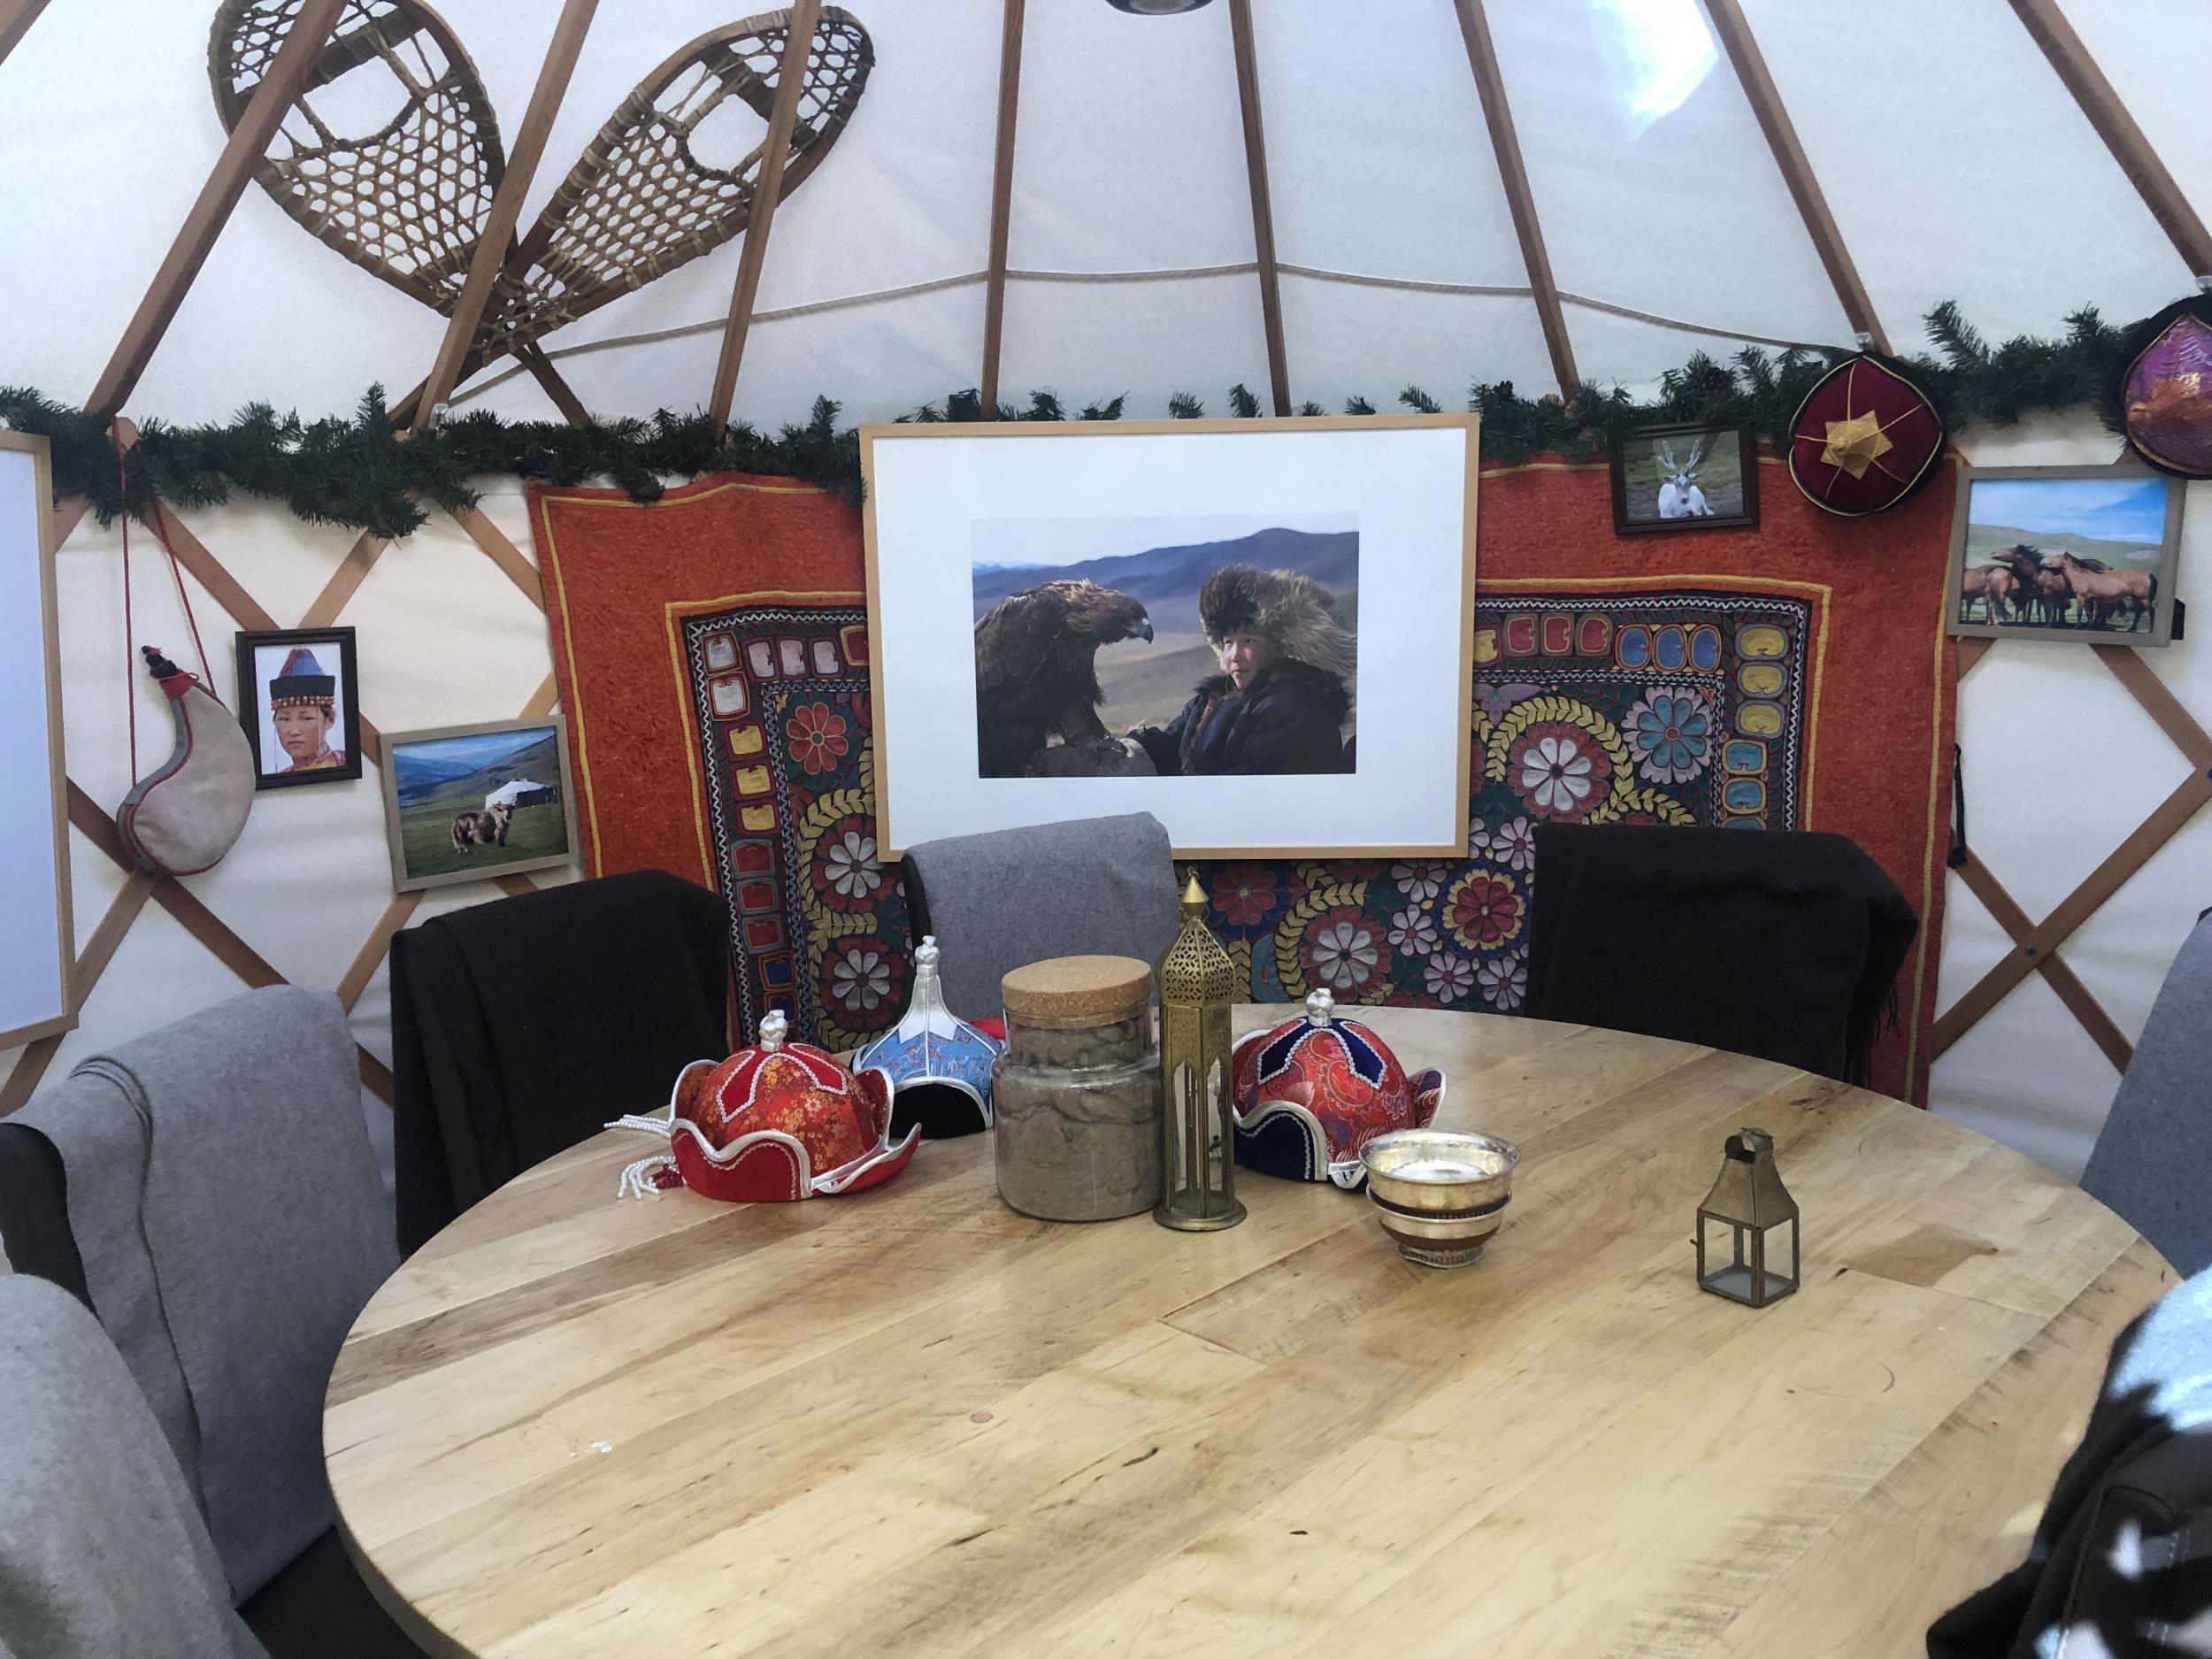 Guests can choose to dine in the yurts